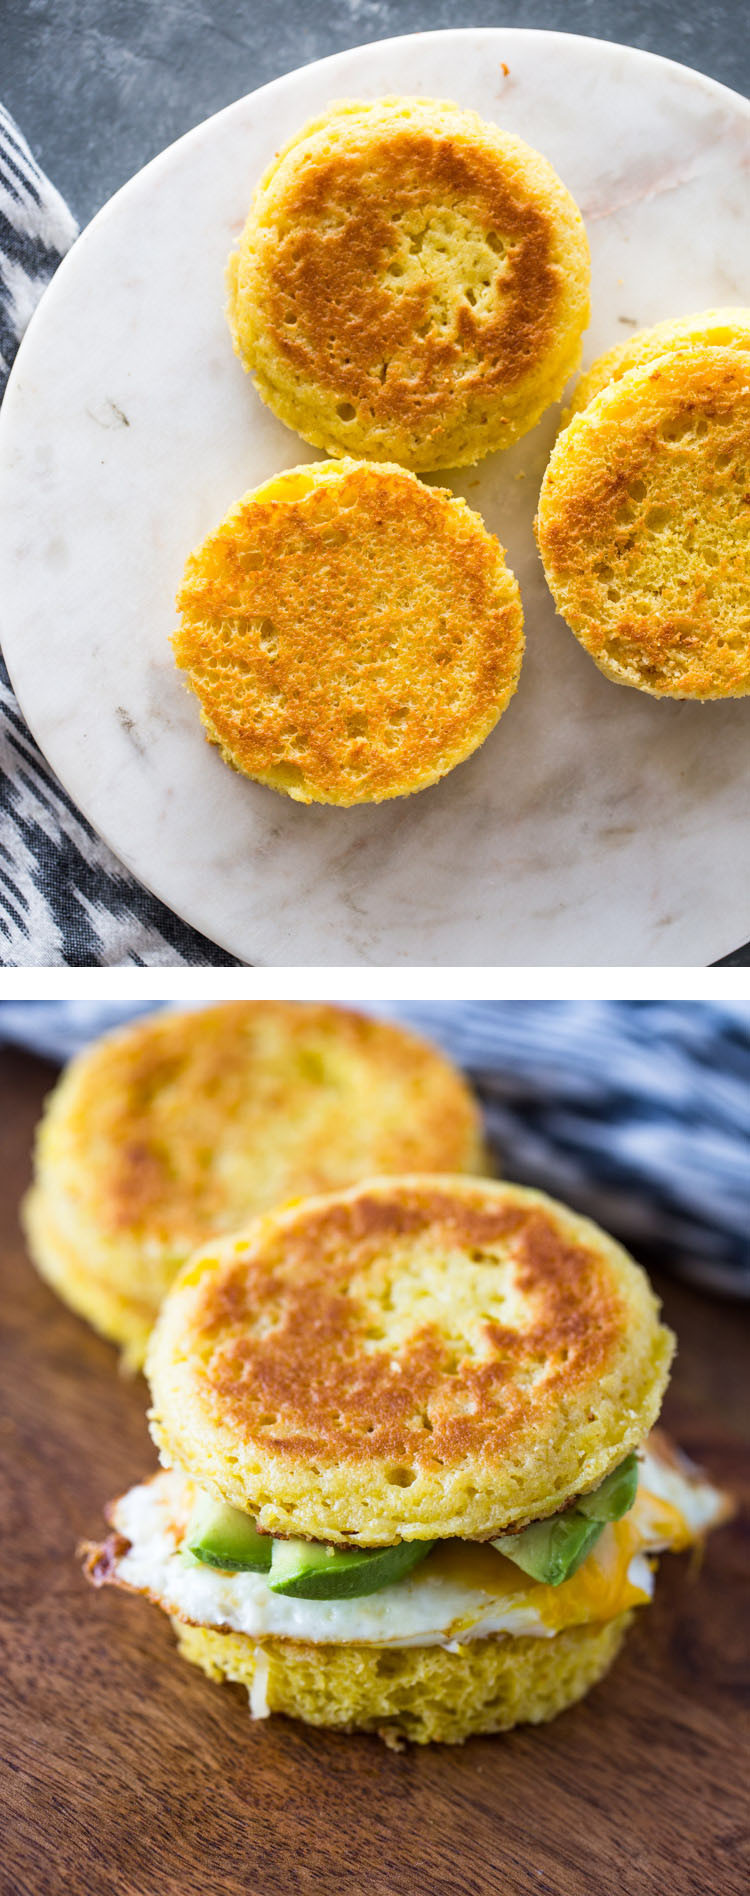 90 Second Keto Bread Coconut Flour And Almond Flour
 90 Second Microwavable Low Carb Keto Bread